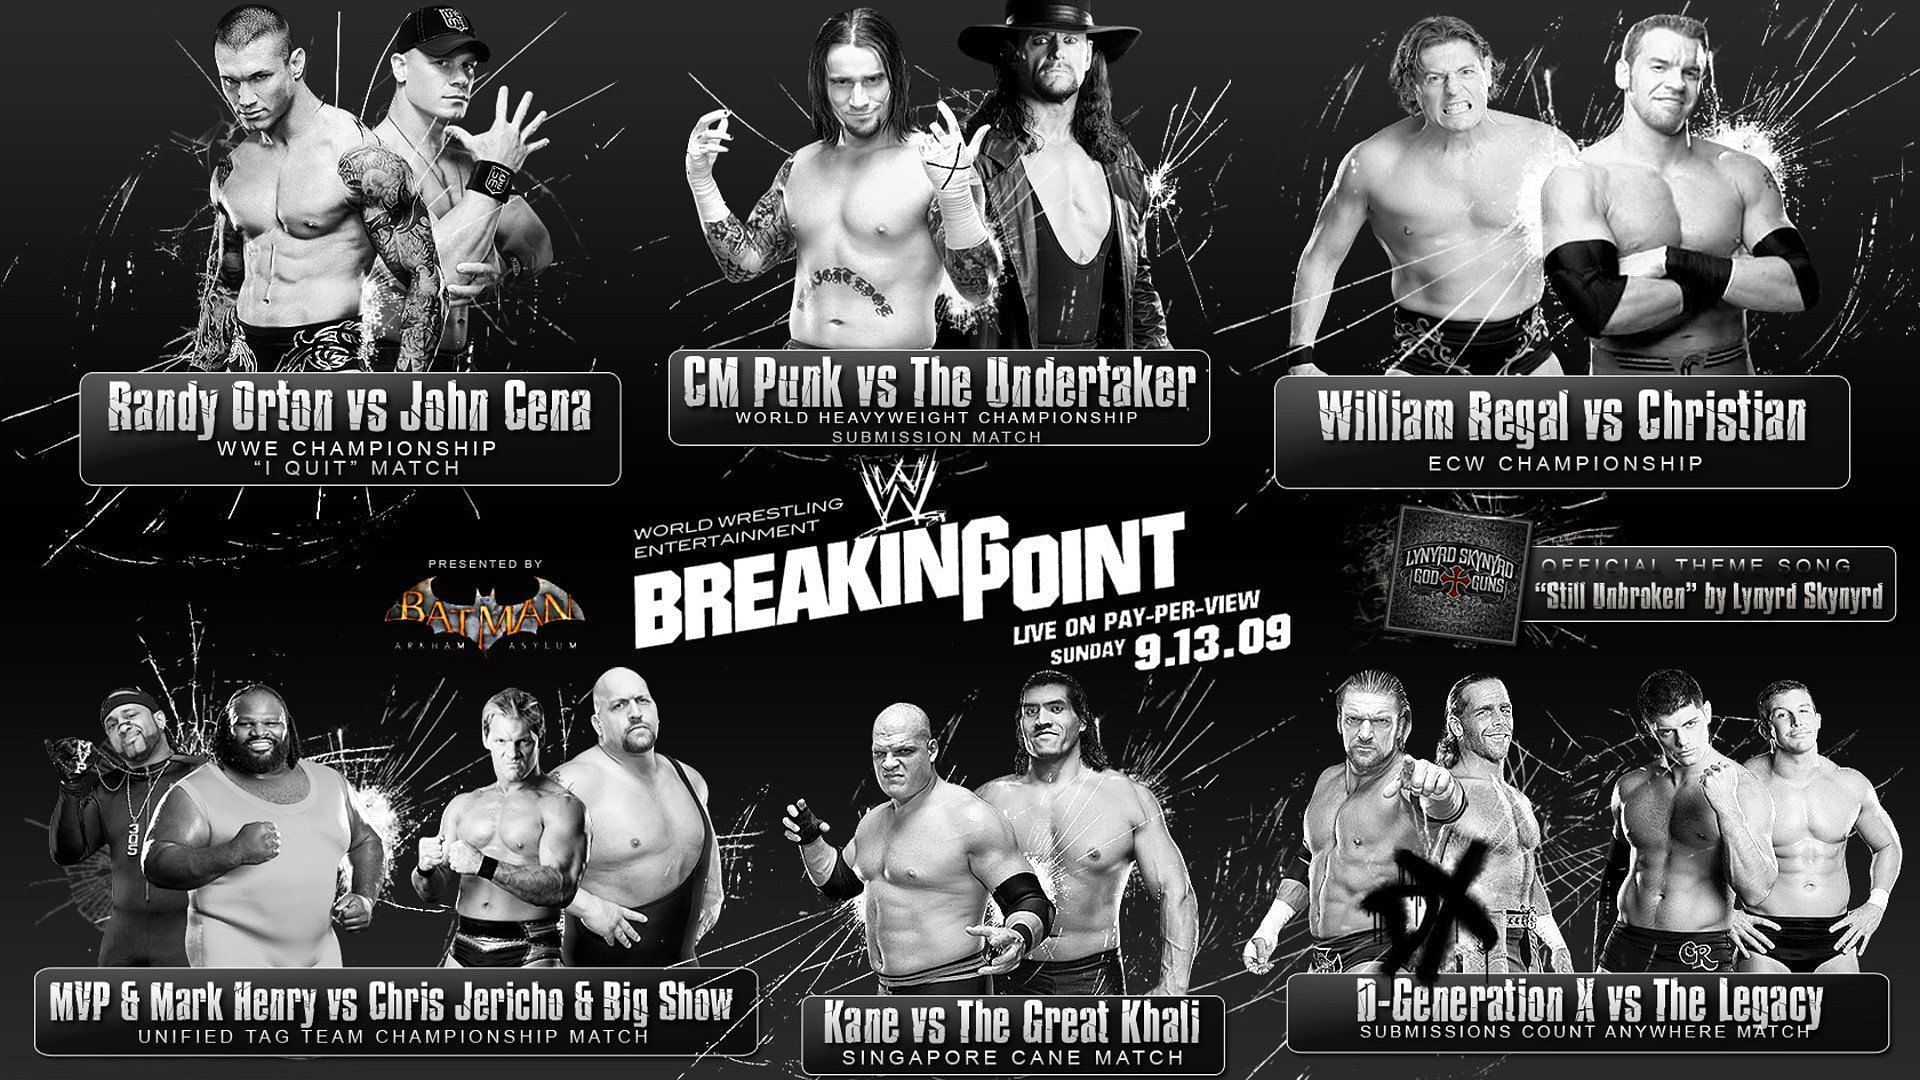 WWE Breaking Point was a one-off event that took place in September 2009.